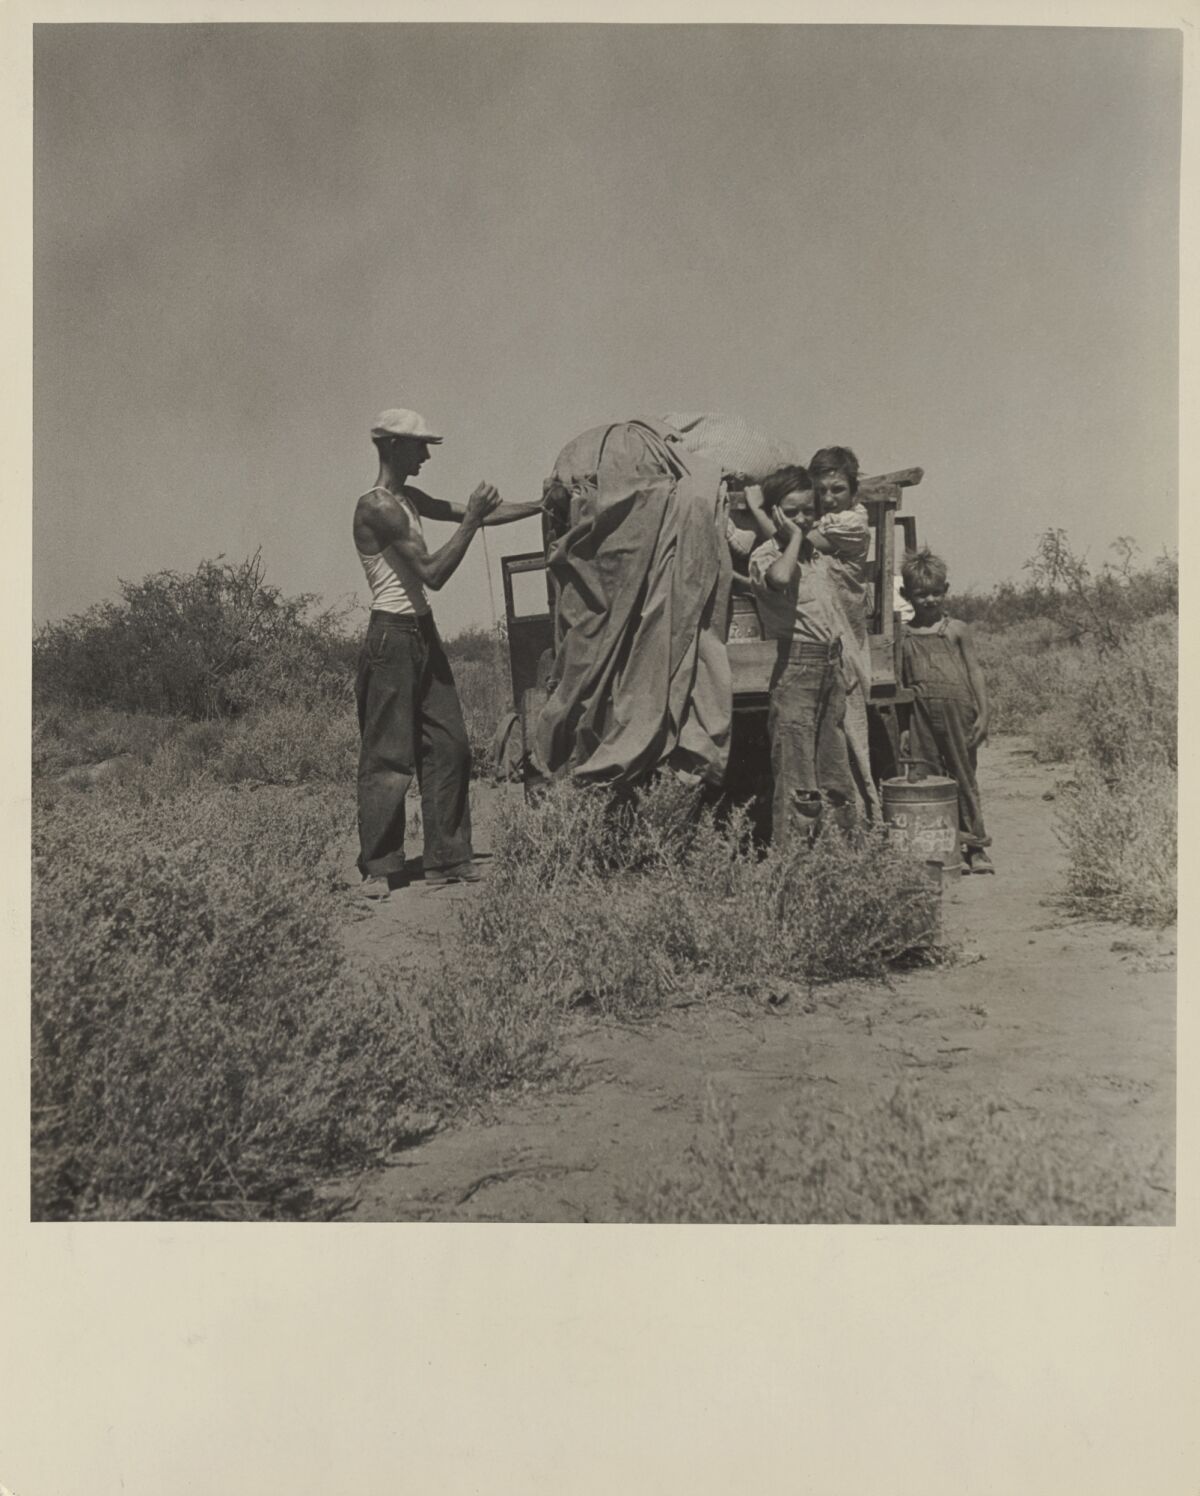 Dorothea Lange’s “Transients, New Mexico, negative about 1935; print before 1938.” (Dorothea Lange / J. Paul Getty Museum)